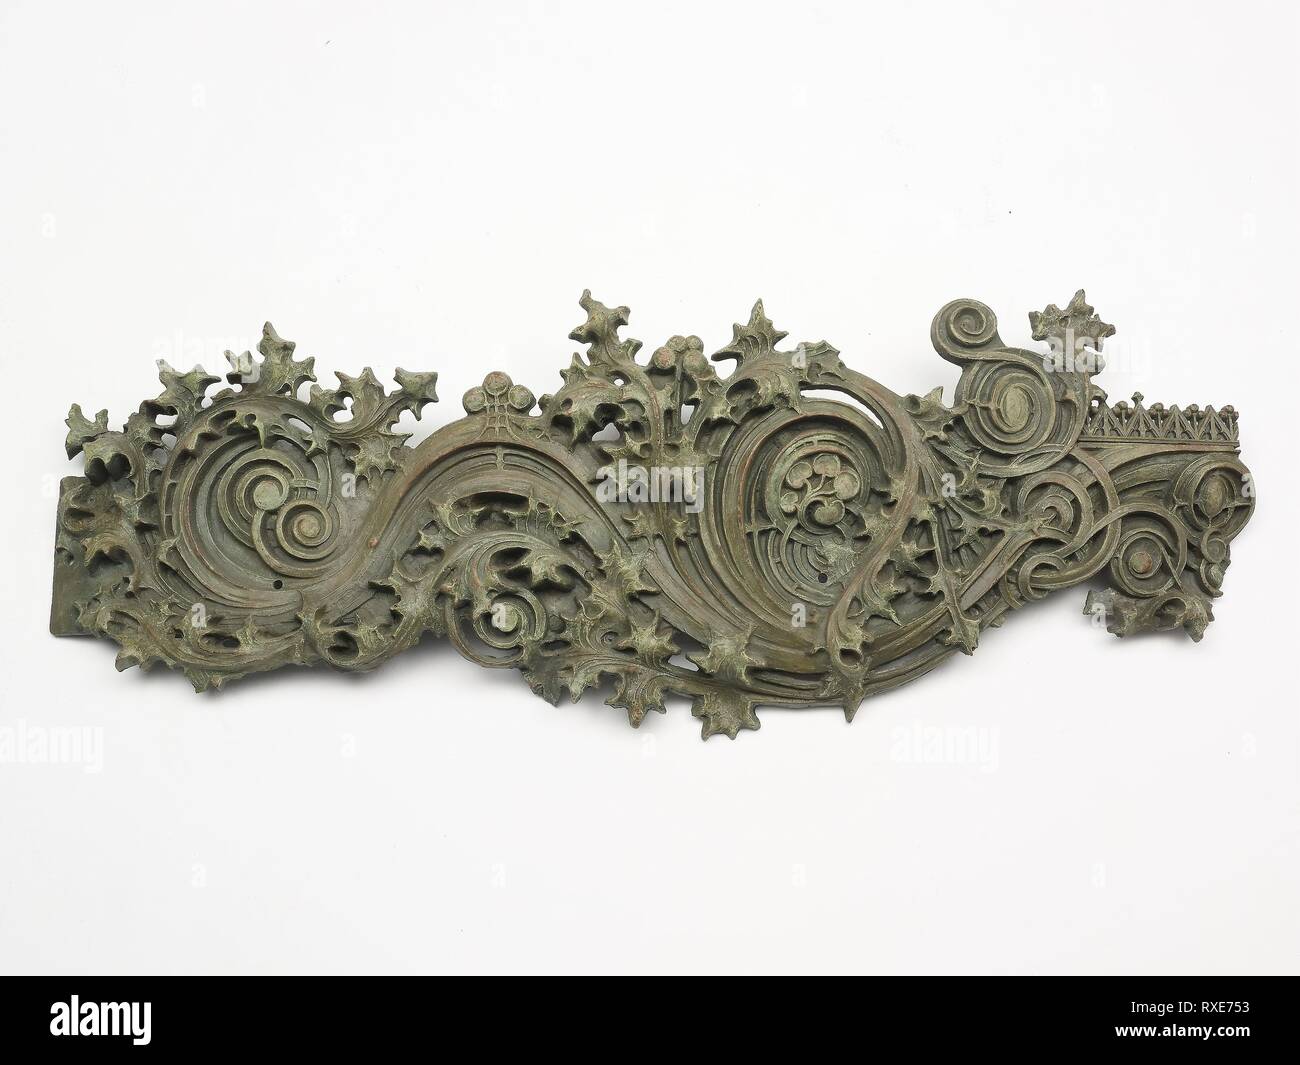 Gage Building: Horizontal Ornament from the Facade. Designer: Louis H. Sullivan (American, 1856-1924); Model by: Kristian Schneider (American, late 19th cen.); Cast by: Winslow Brothers Iron Works (American, late 19th Cen); Architect: Holabird &amp; Roche. Date: 1898-1899. Dimensions: 45.8 × 126 × 16.5 cm. Cast iron. Origin: Michigan Avenue, 18 South. Museum: The Chicago Art Institute. Stock Photo